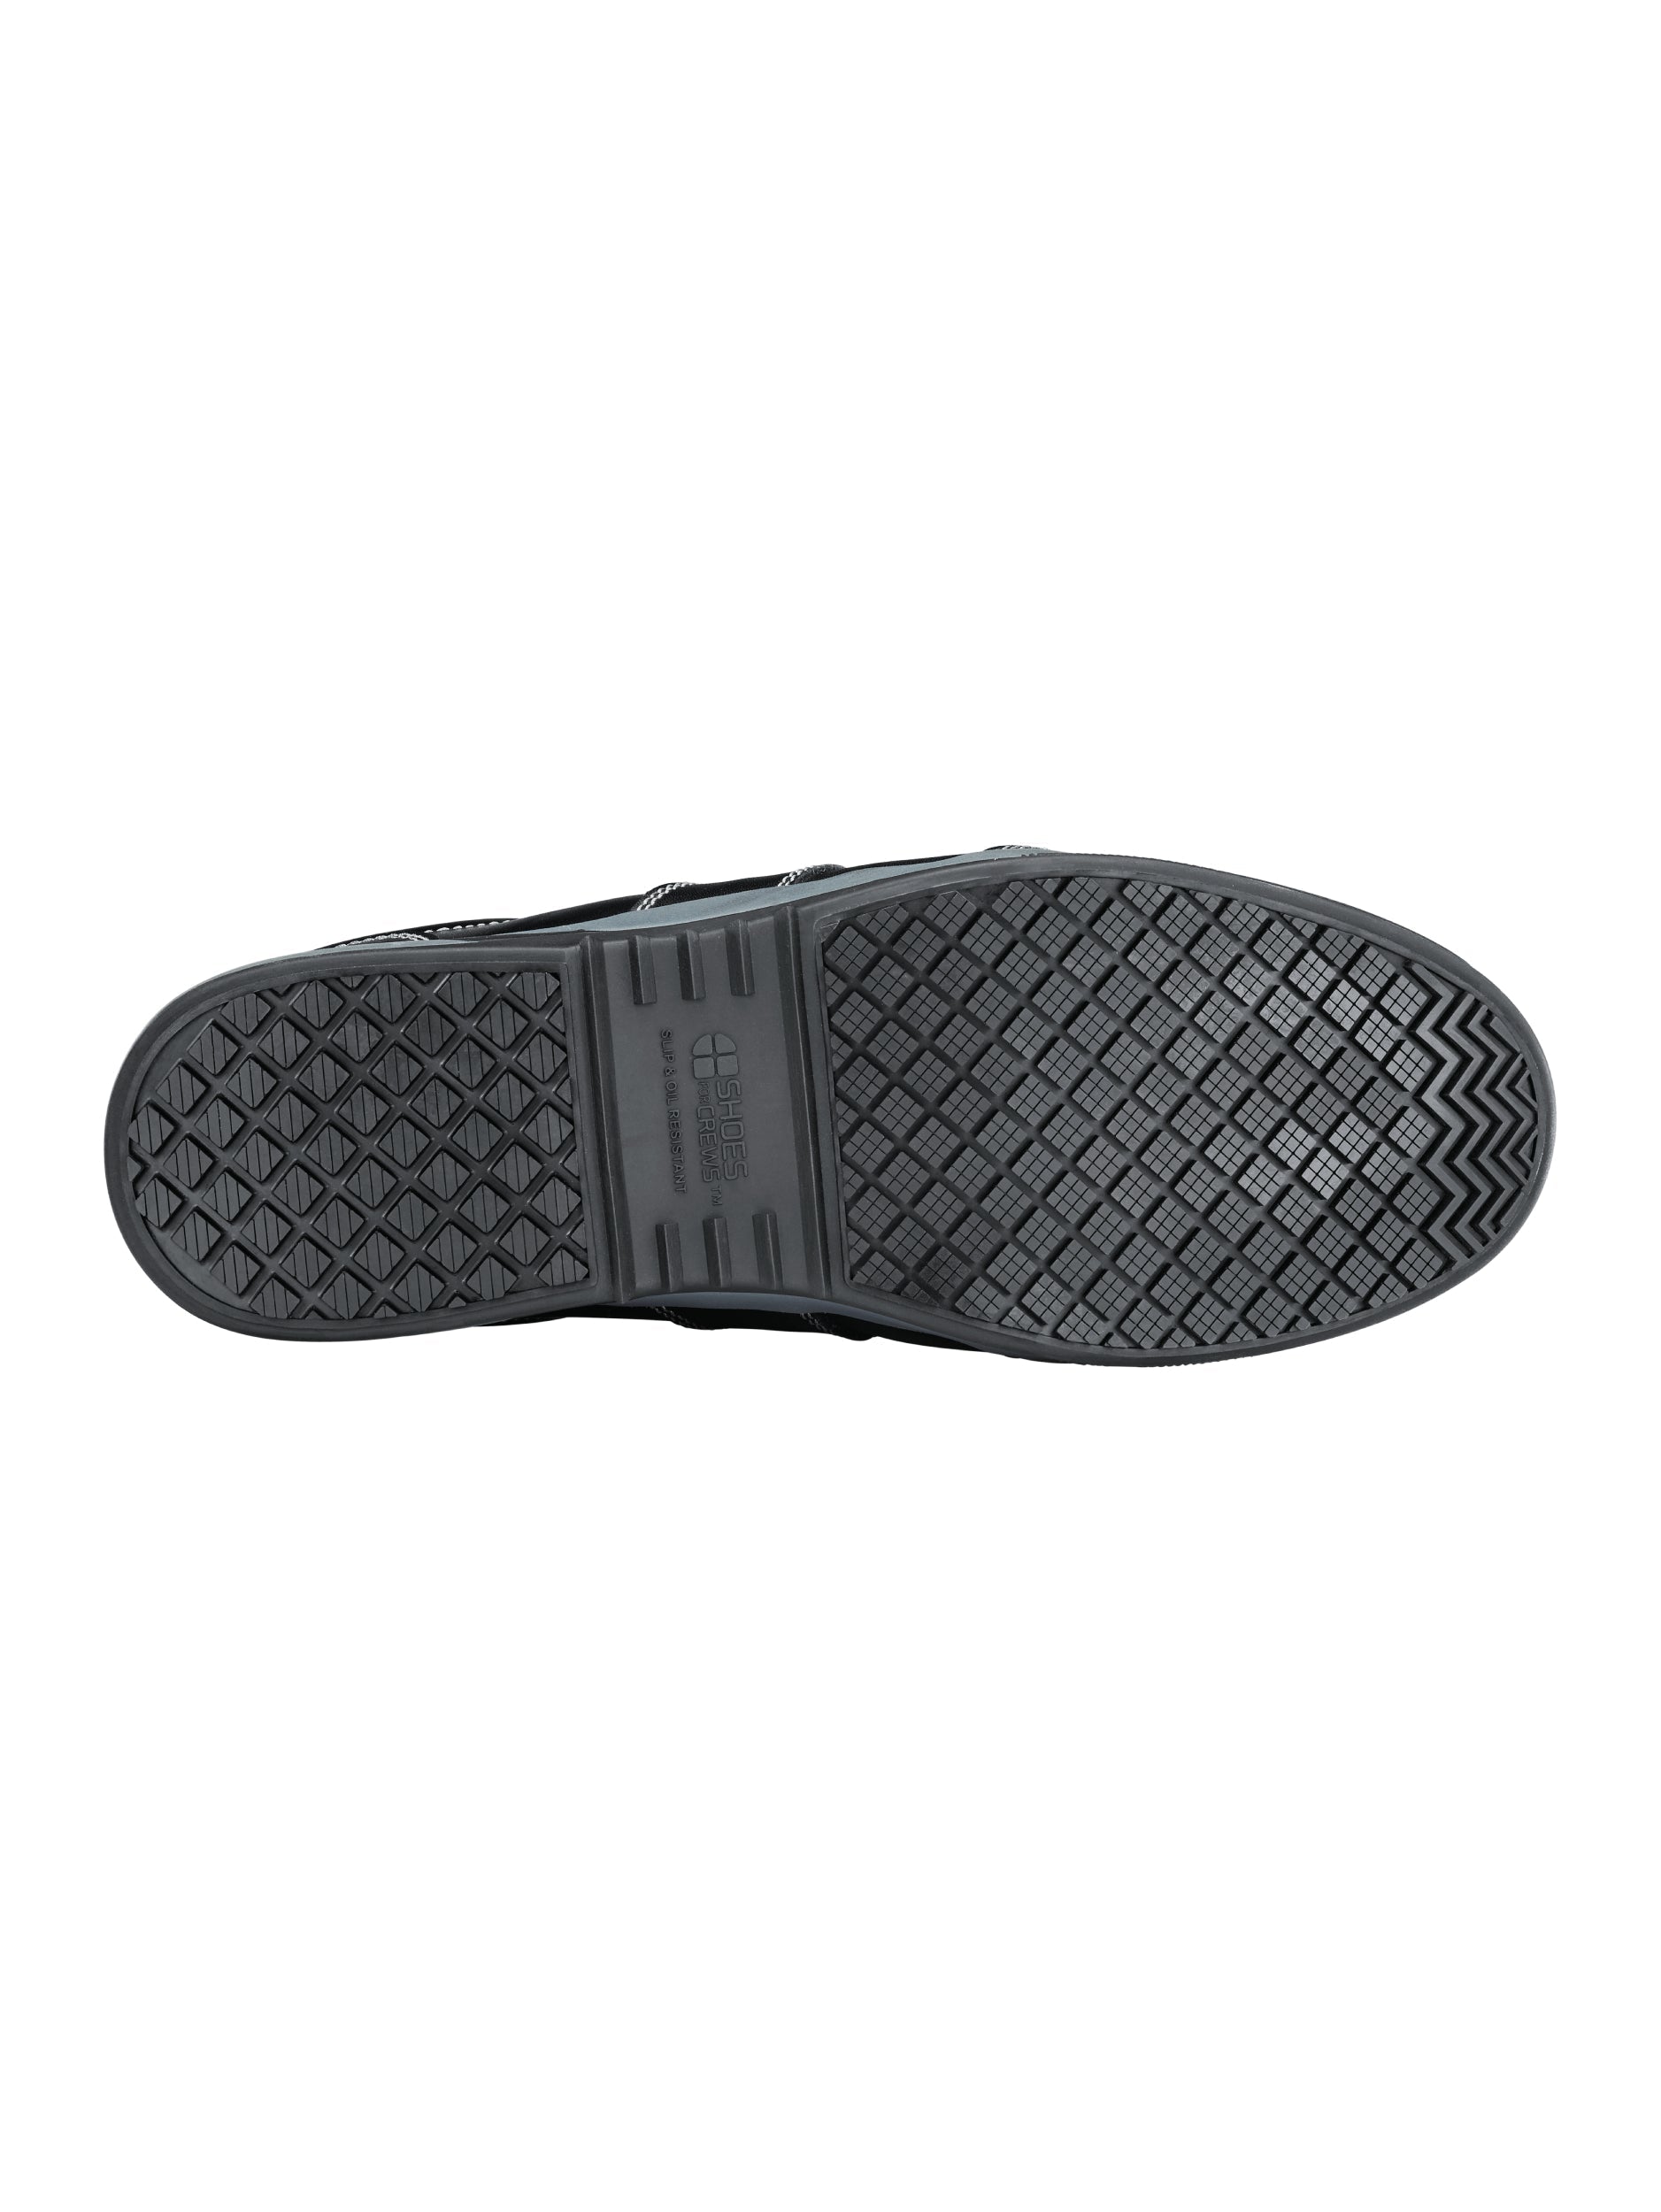 Men's Safety Shoe Clyde (S3) by Shoes For Crews -  ChefsCotton